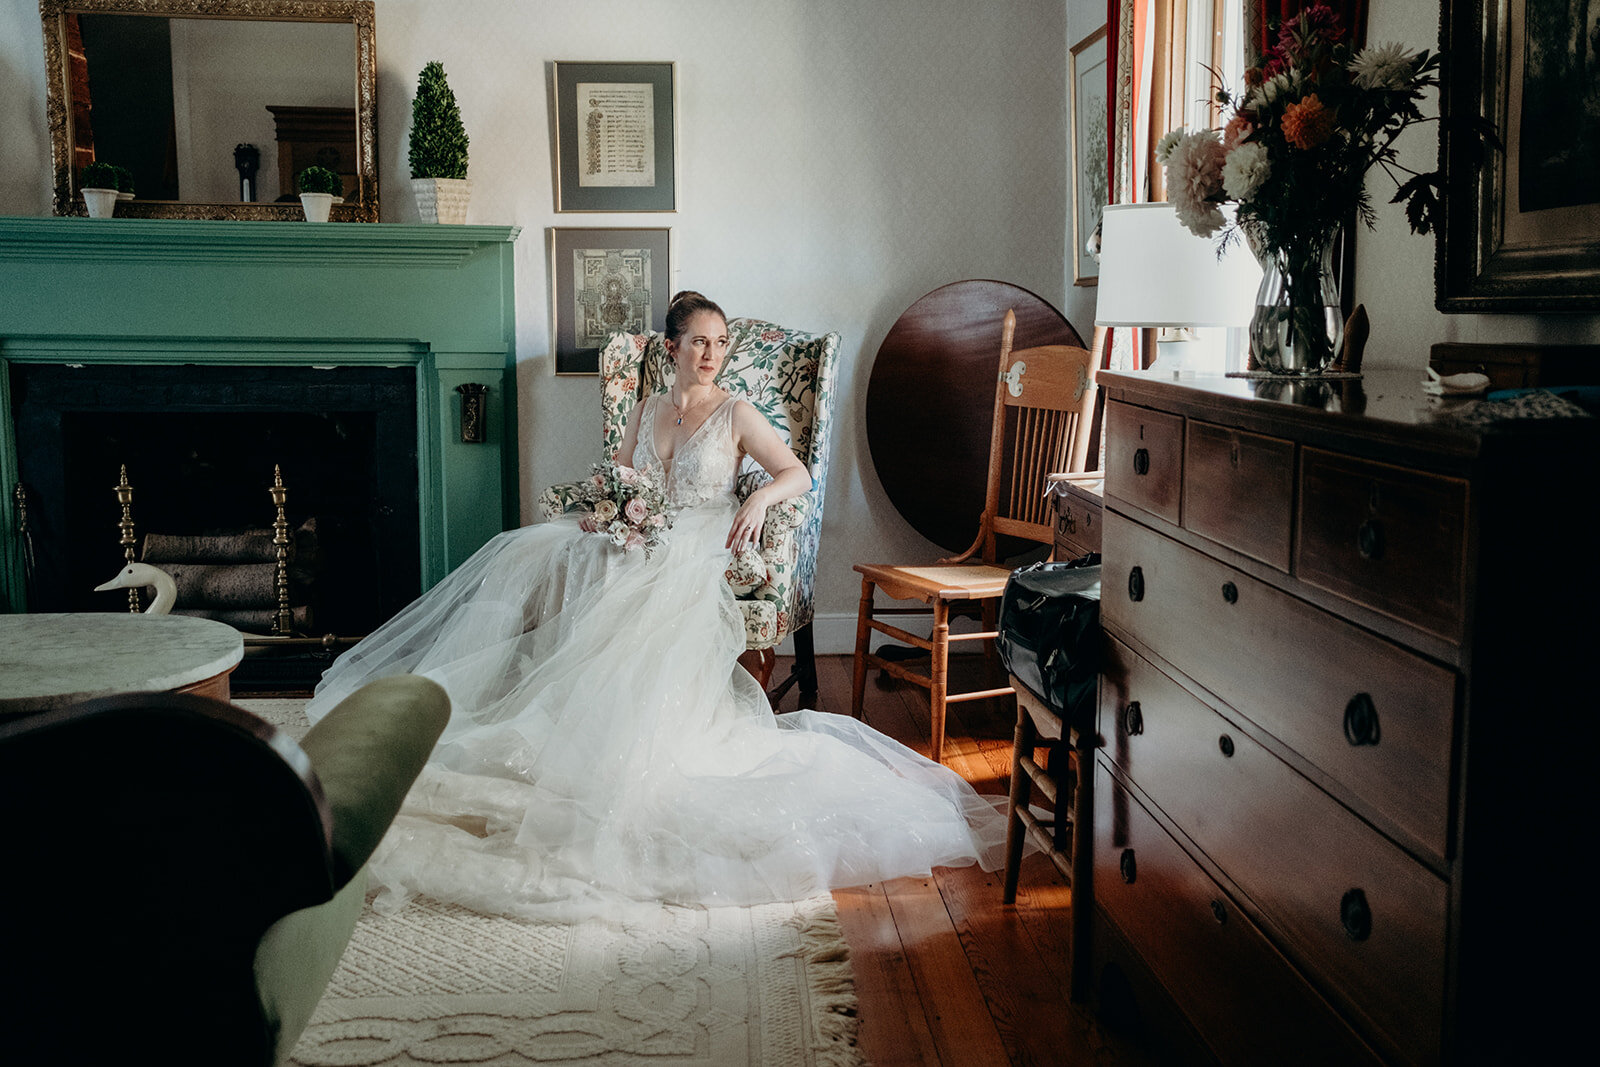 A bride sits in the living room of an old farmhouse and looks out the window before her outdoor wedding ceremony.